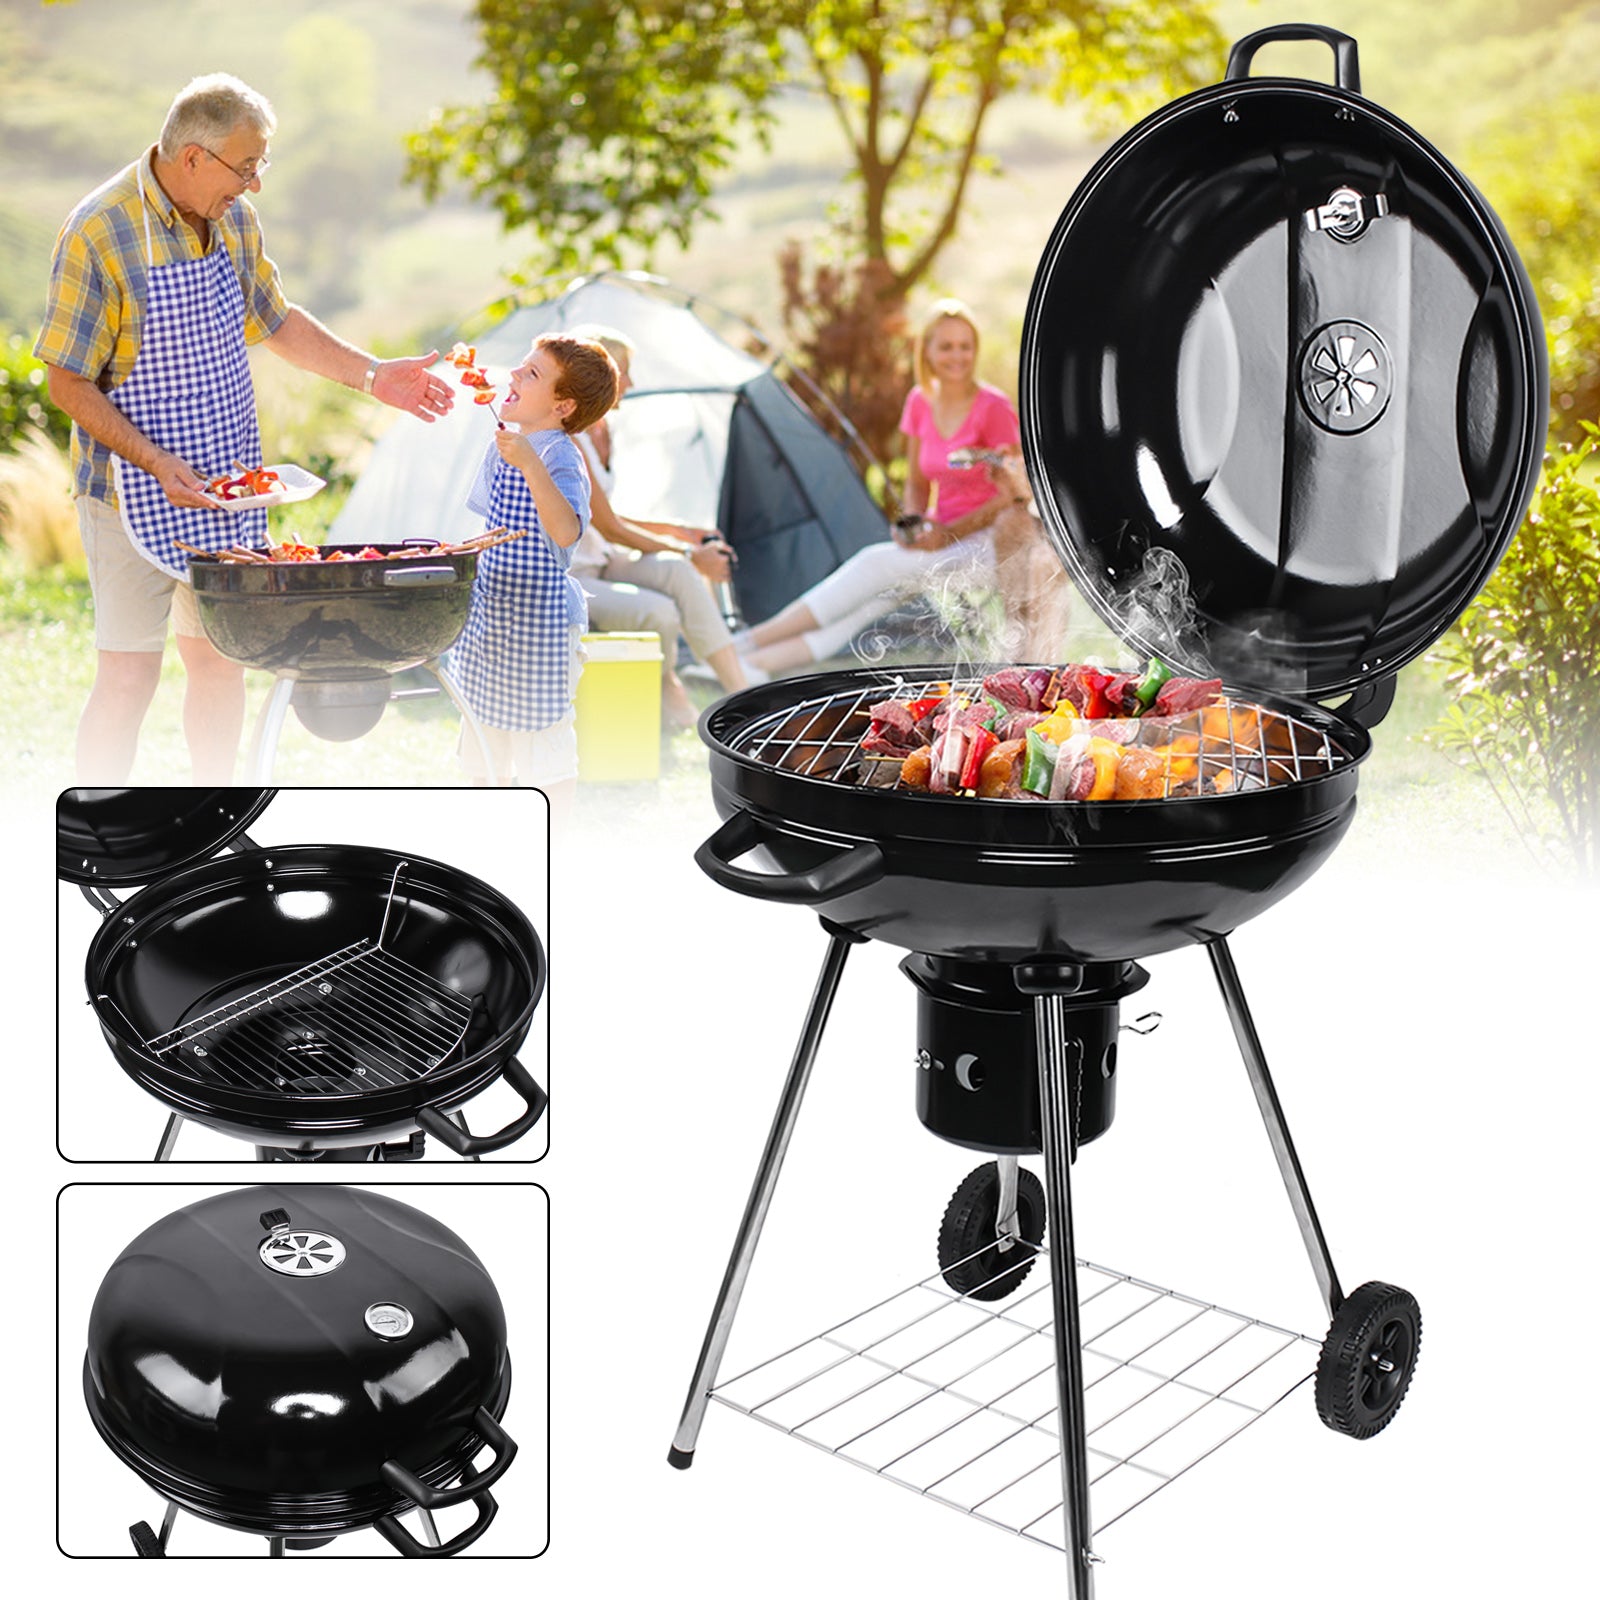 Kugelgrill Ø 58 cm BBQ Grill Holzkohle mit Thermometer Holzkohlegrill Rundgrill